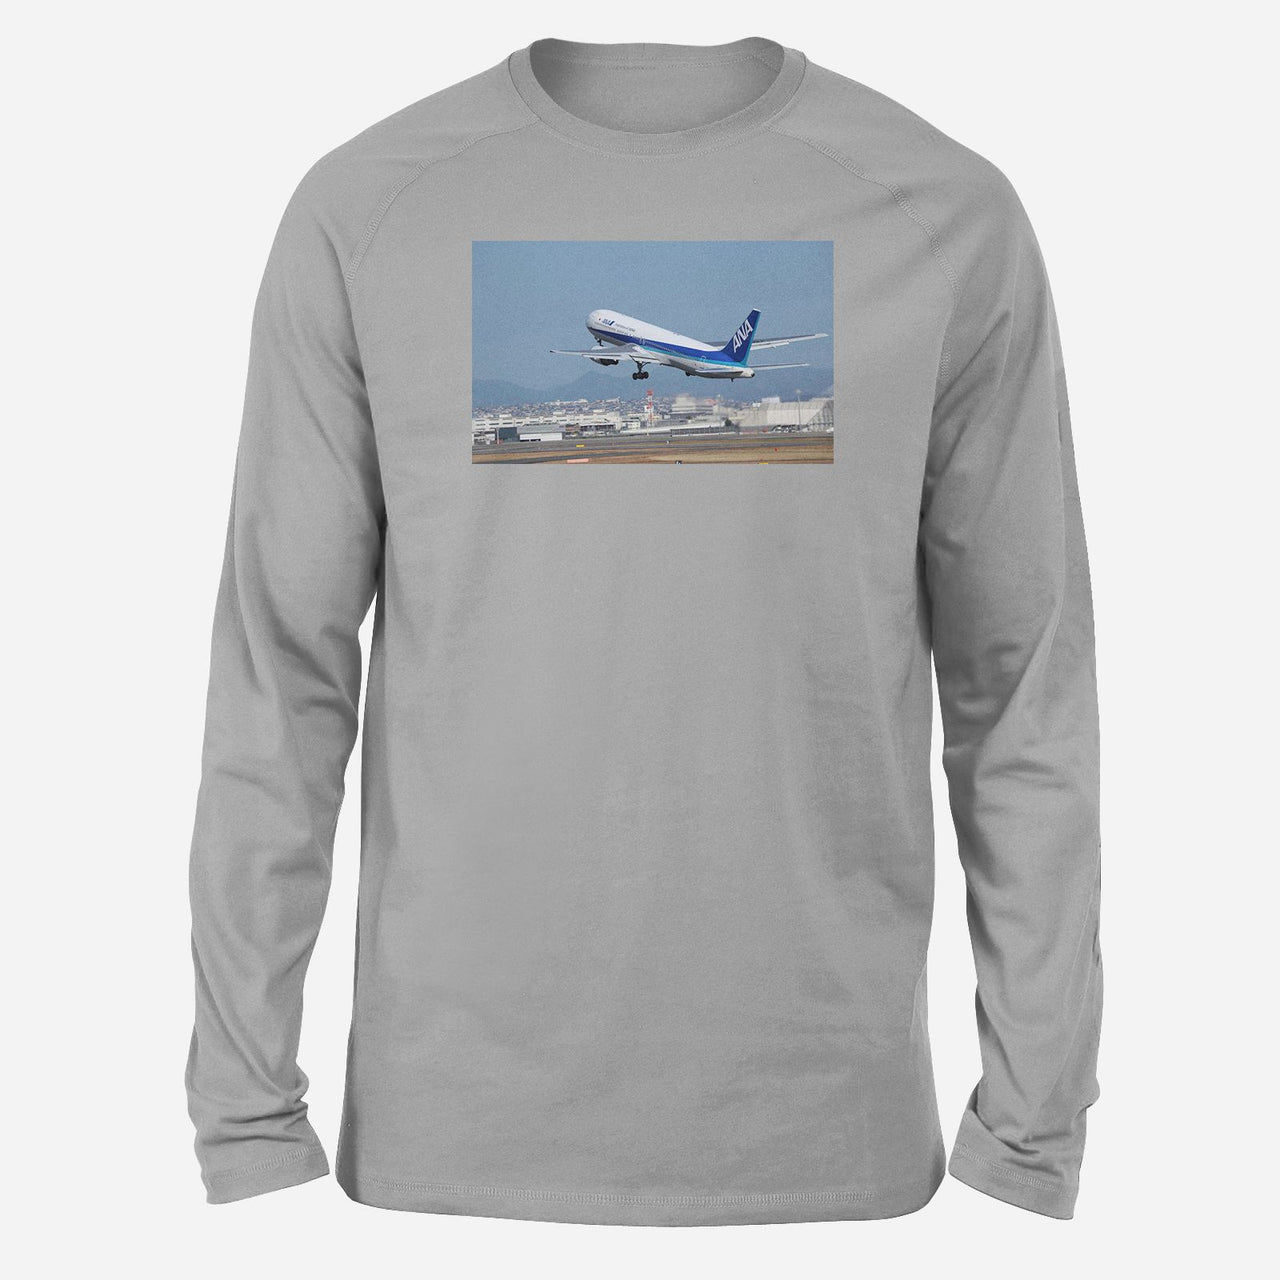 Departing ANA's Boeing 767 Designed Long-Sleeve T-Shirts